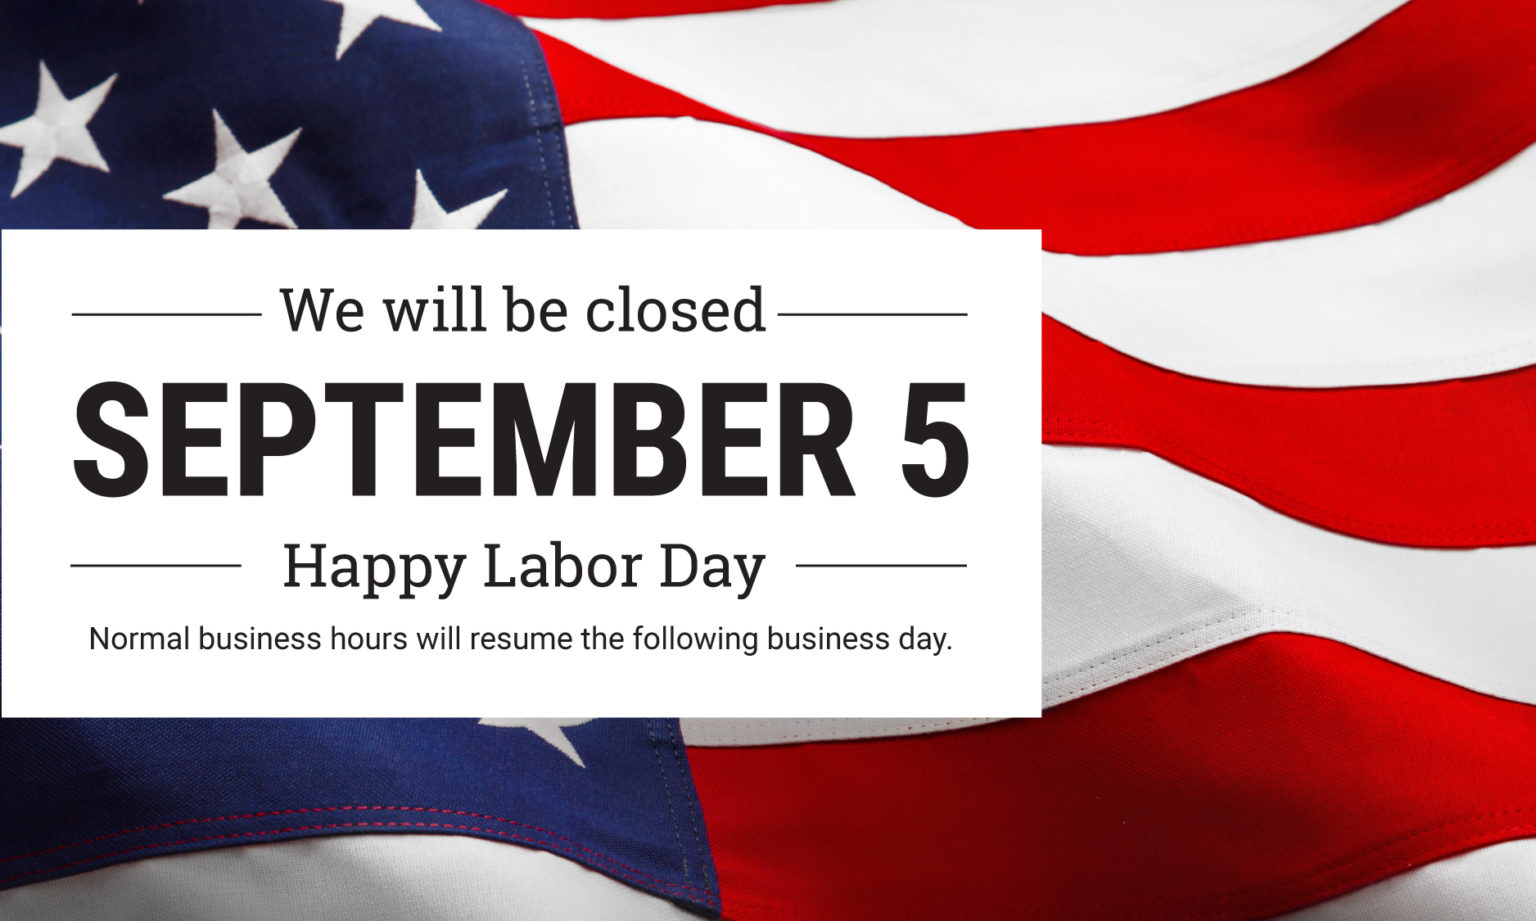 ACMS offices will be Closed Sept. 5th, 2022 in observance of Labor Day